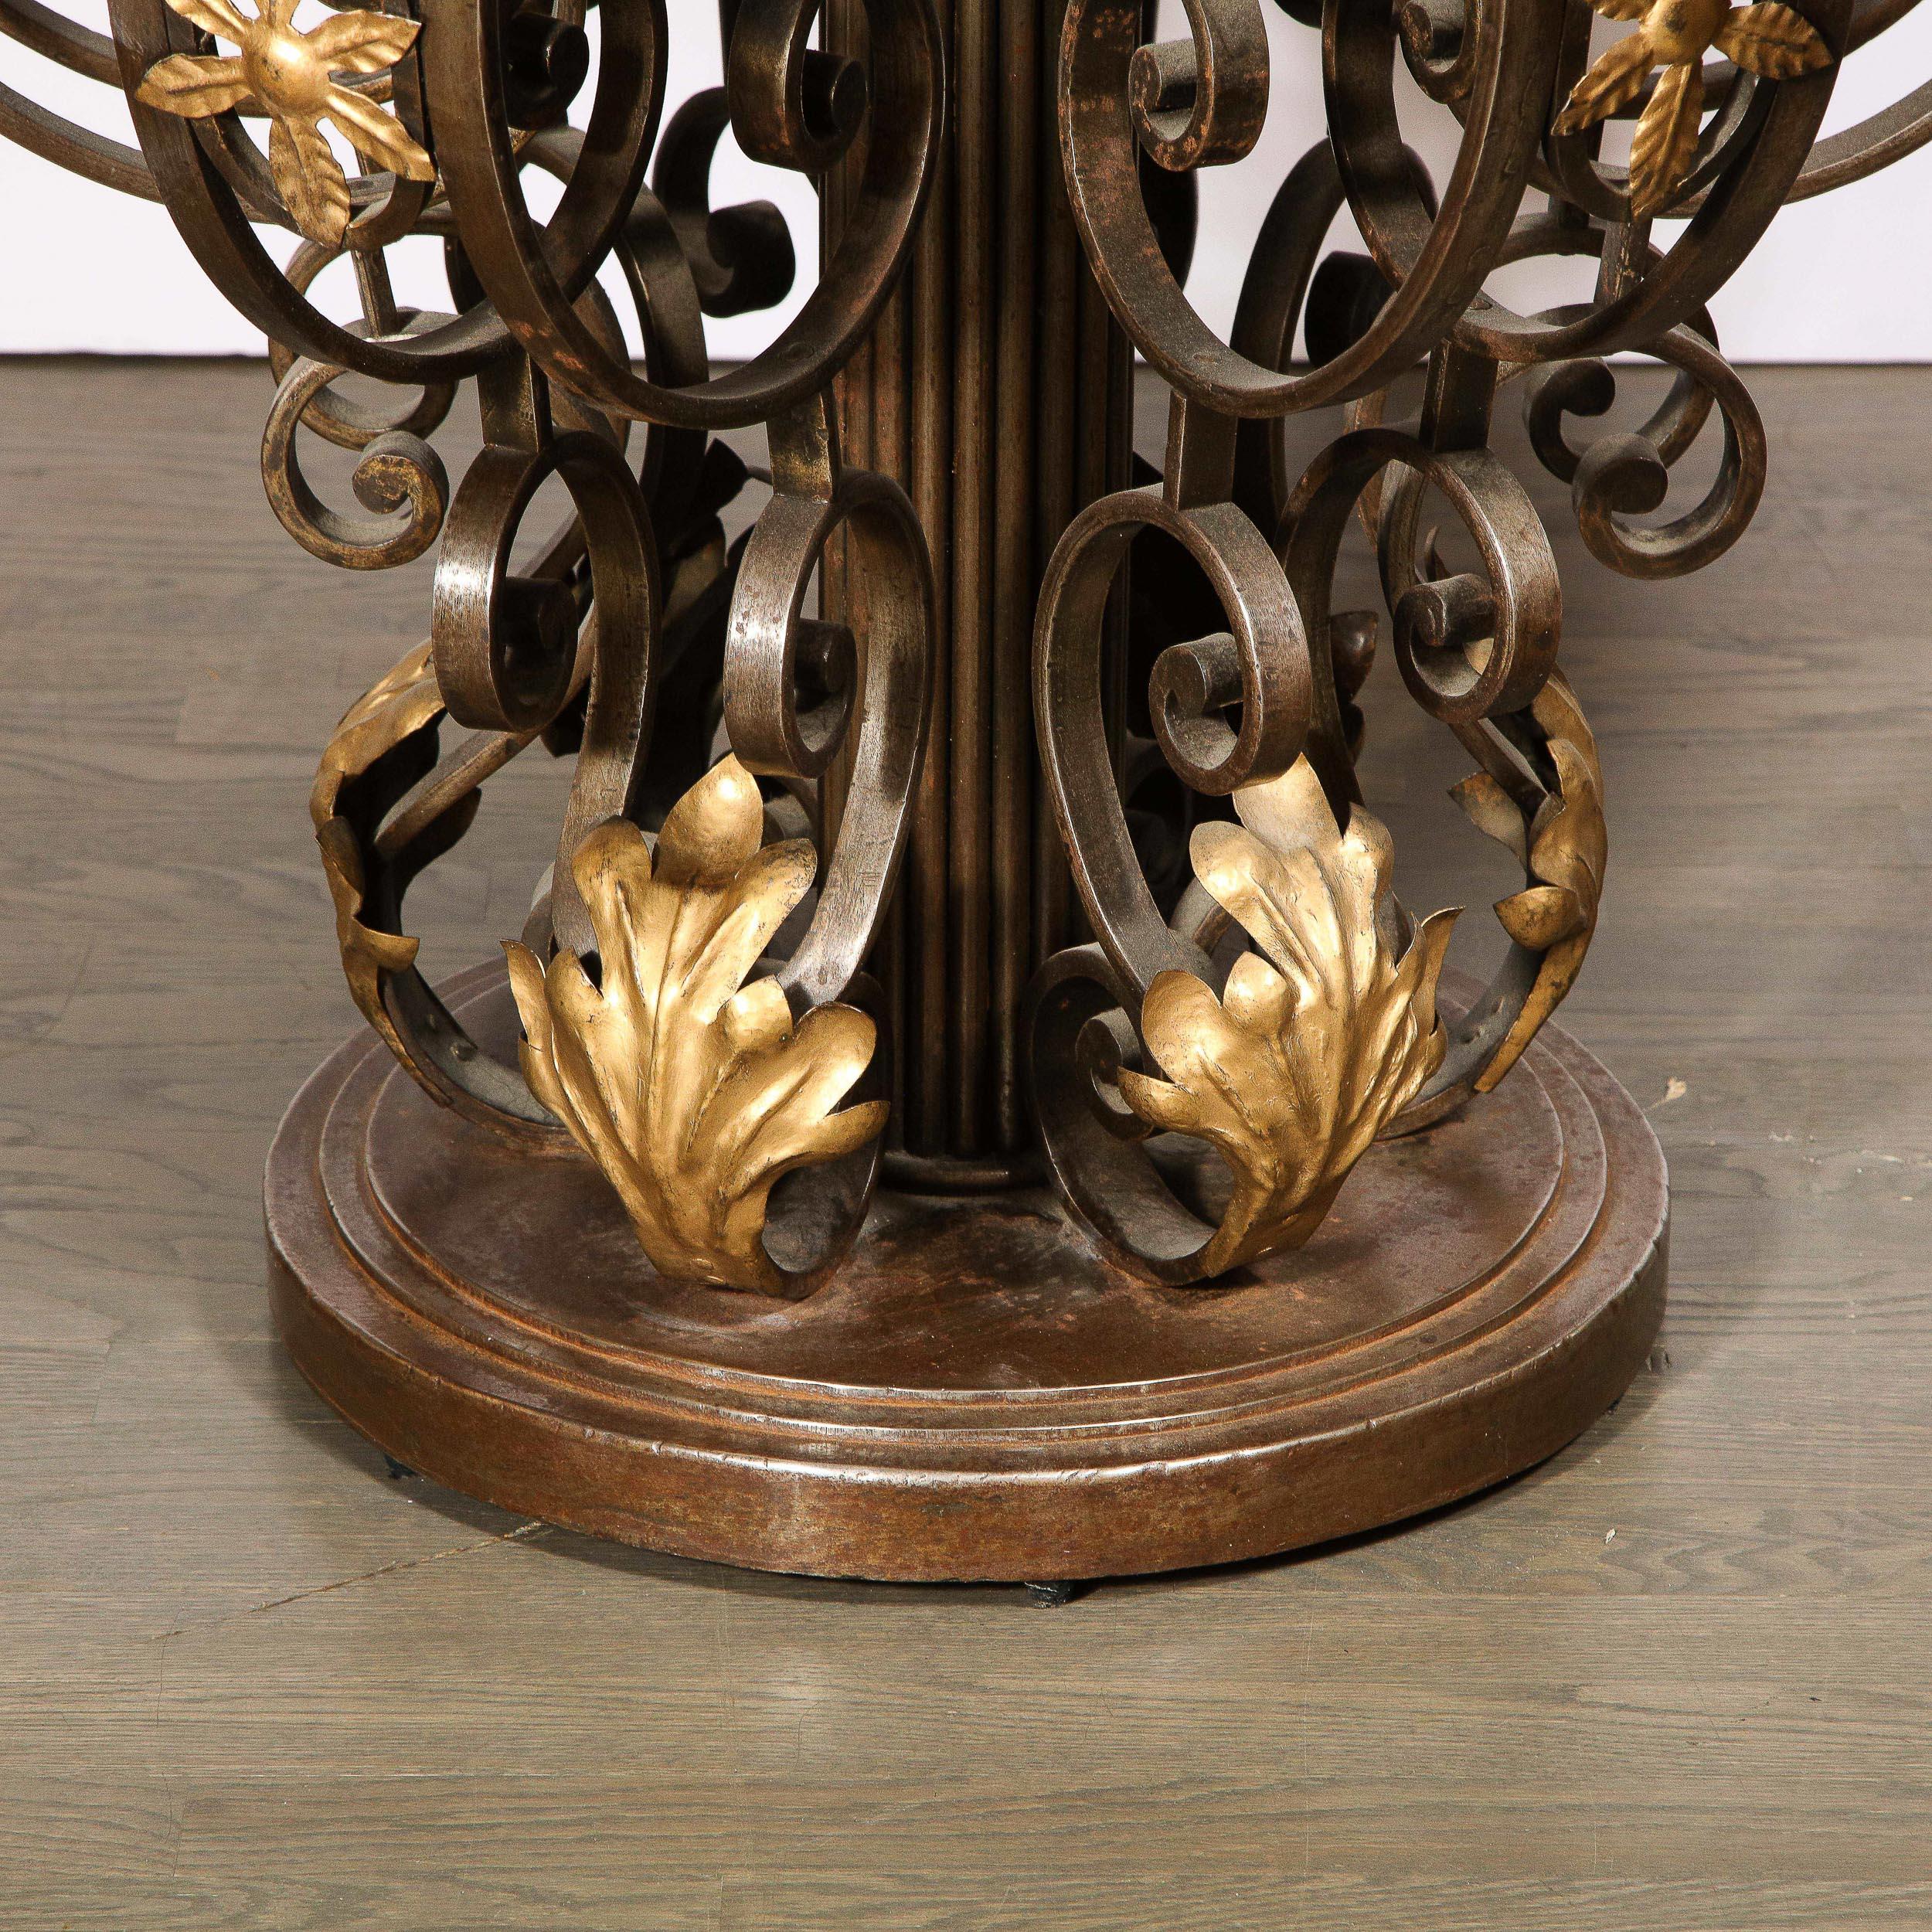 Mid-20th Century French Art Deco Hand Wrought Iron Table with Gilded Accents & Exotic Marble Top